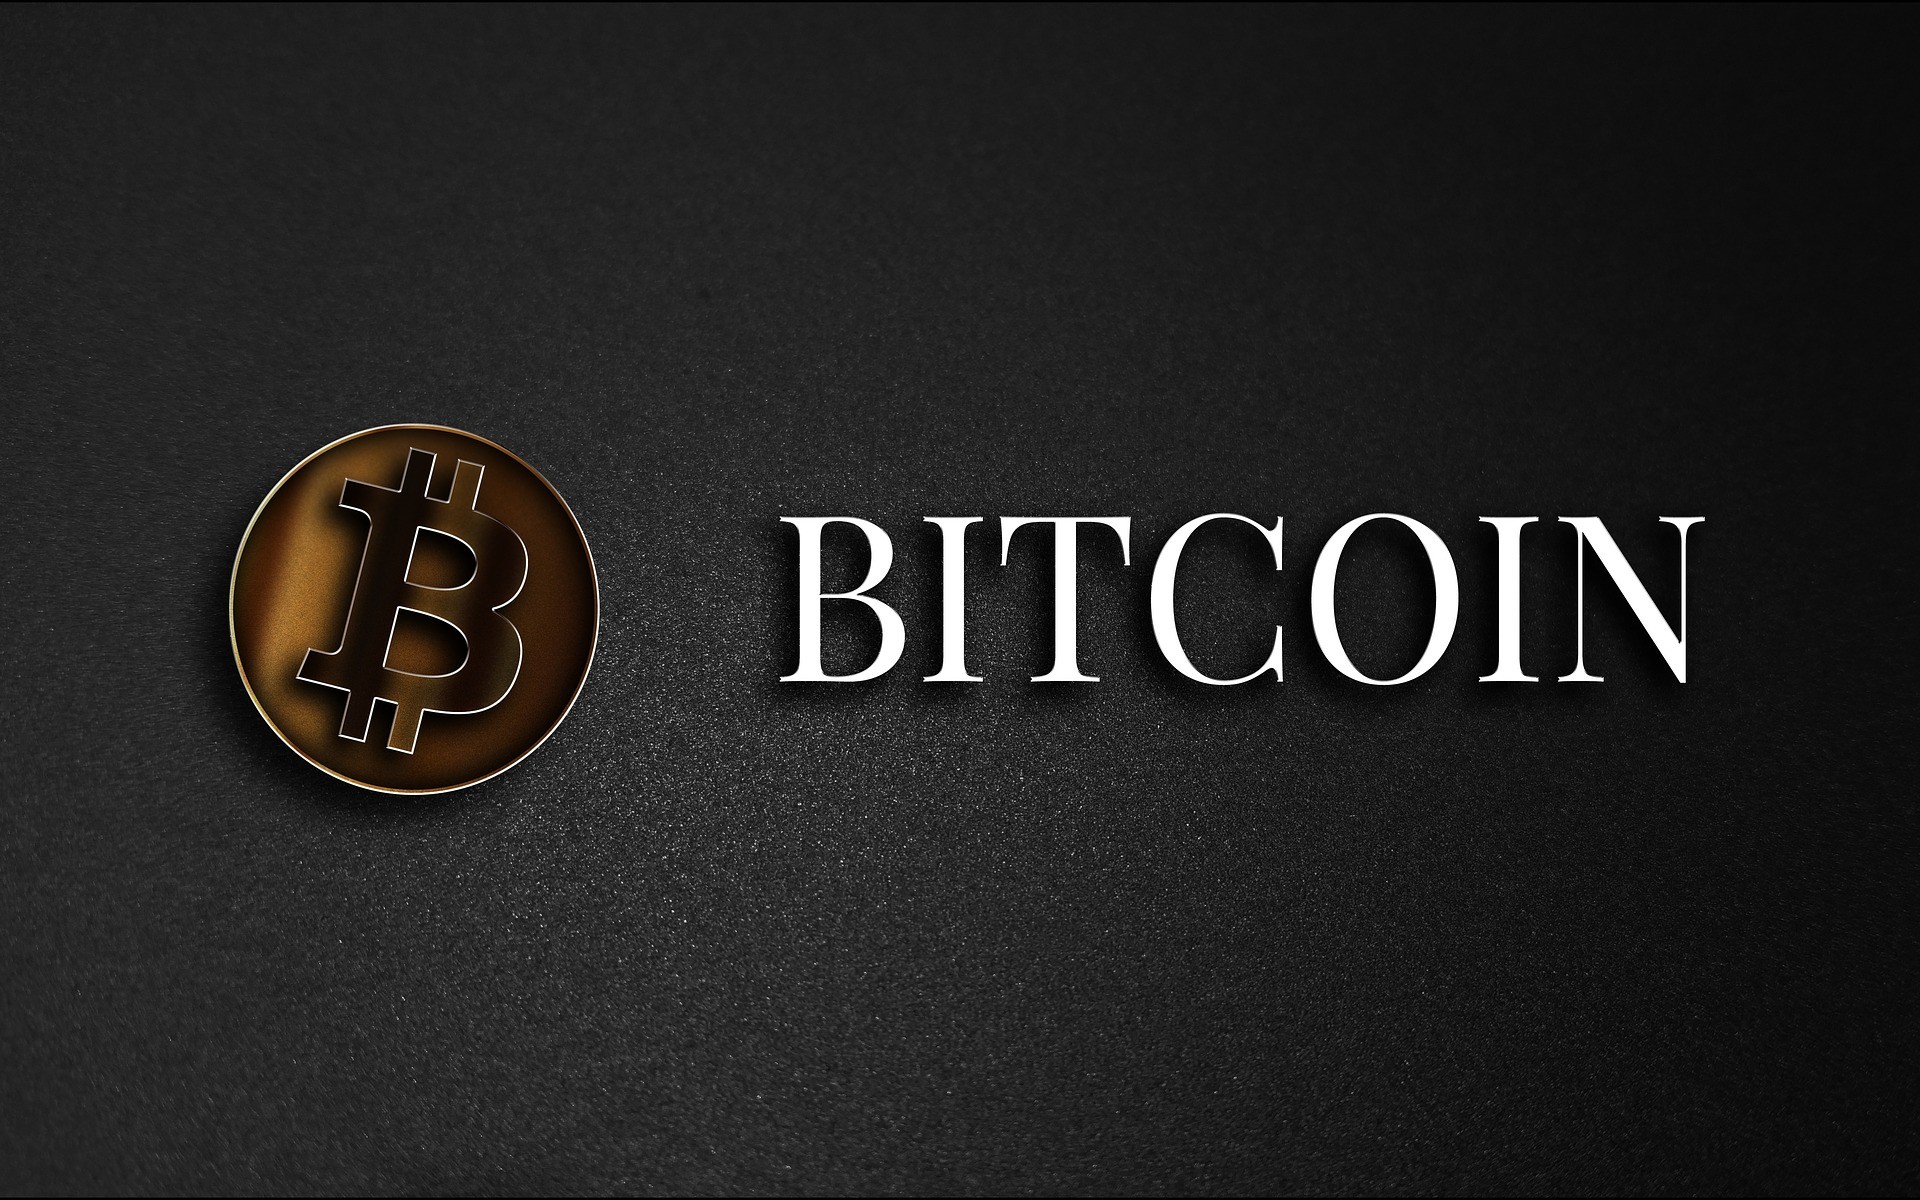 Major New York Real Estate Firm Announces To Accept Bitcoin Payments